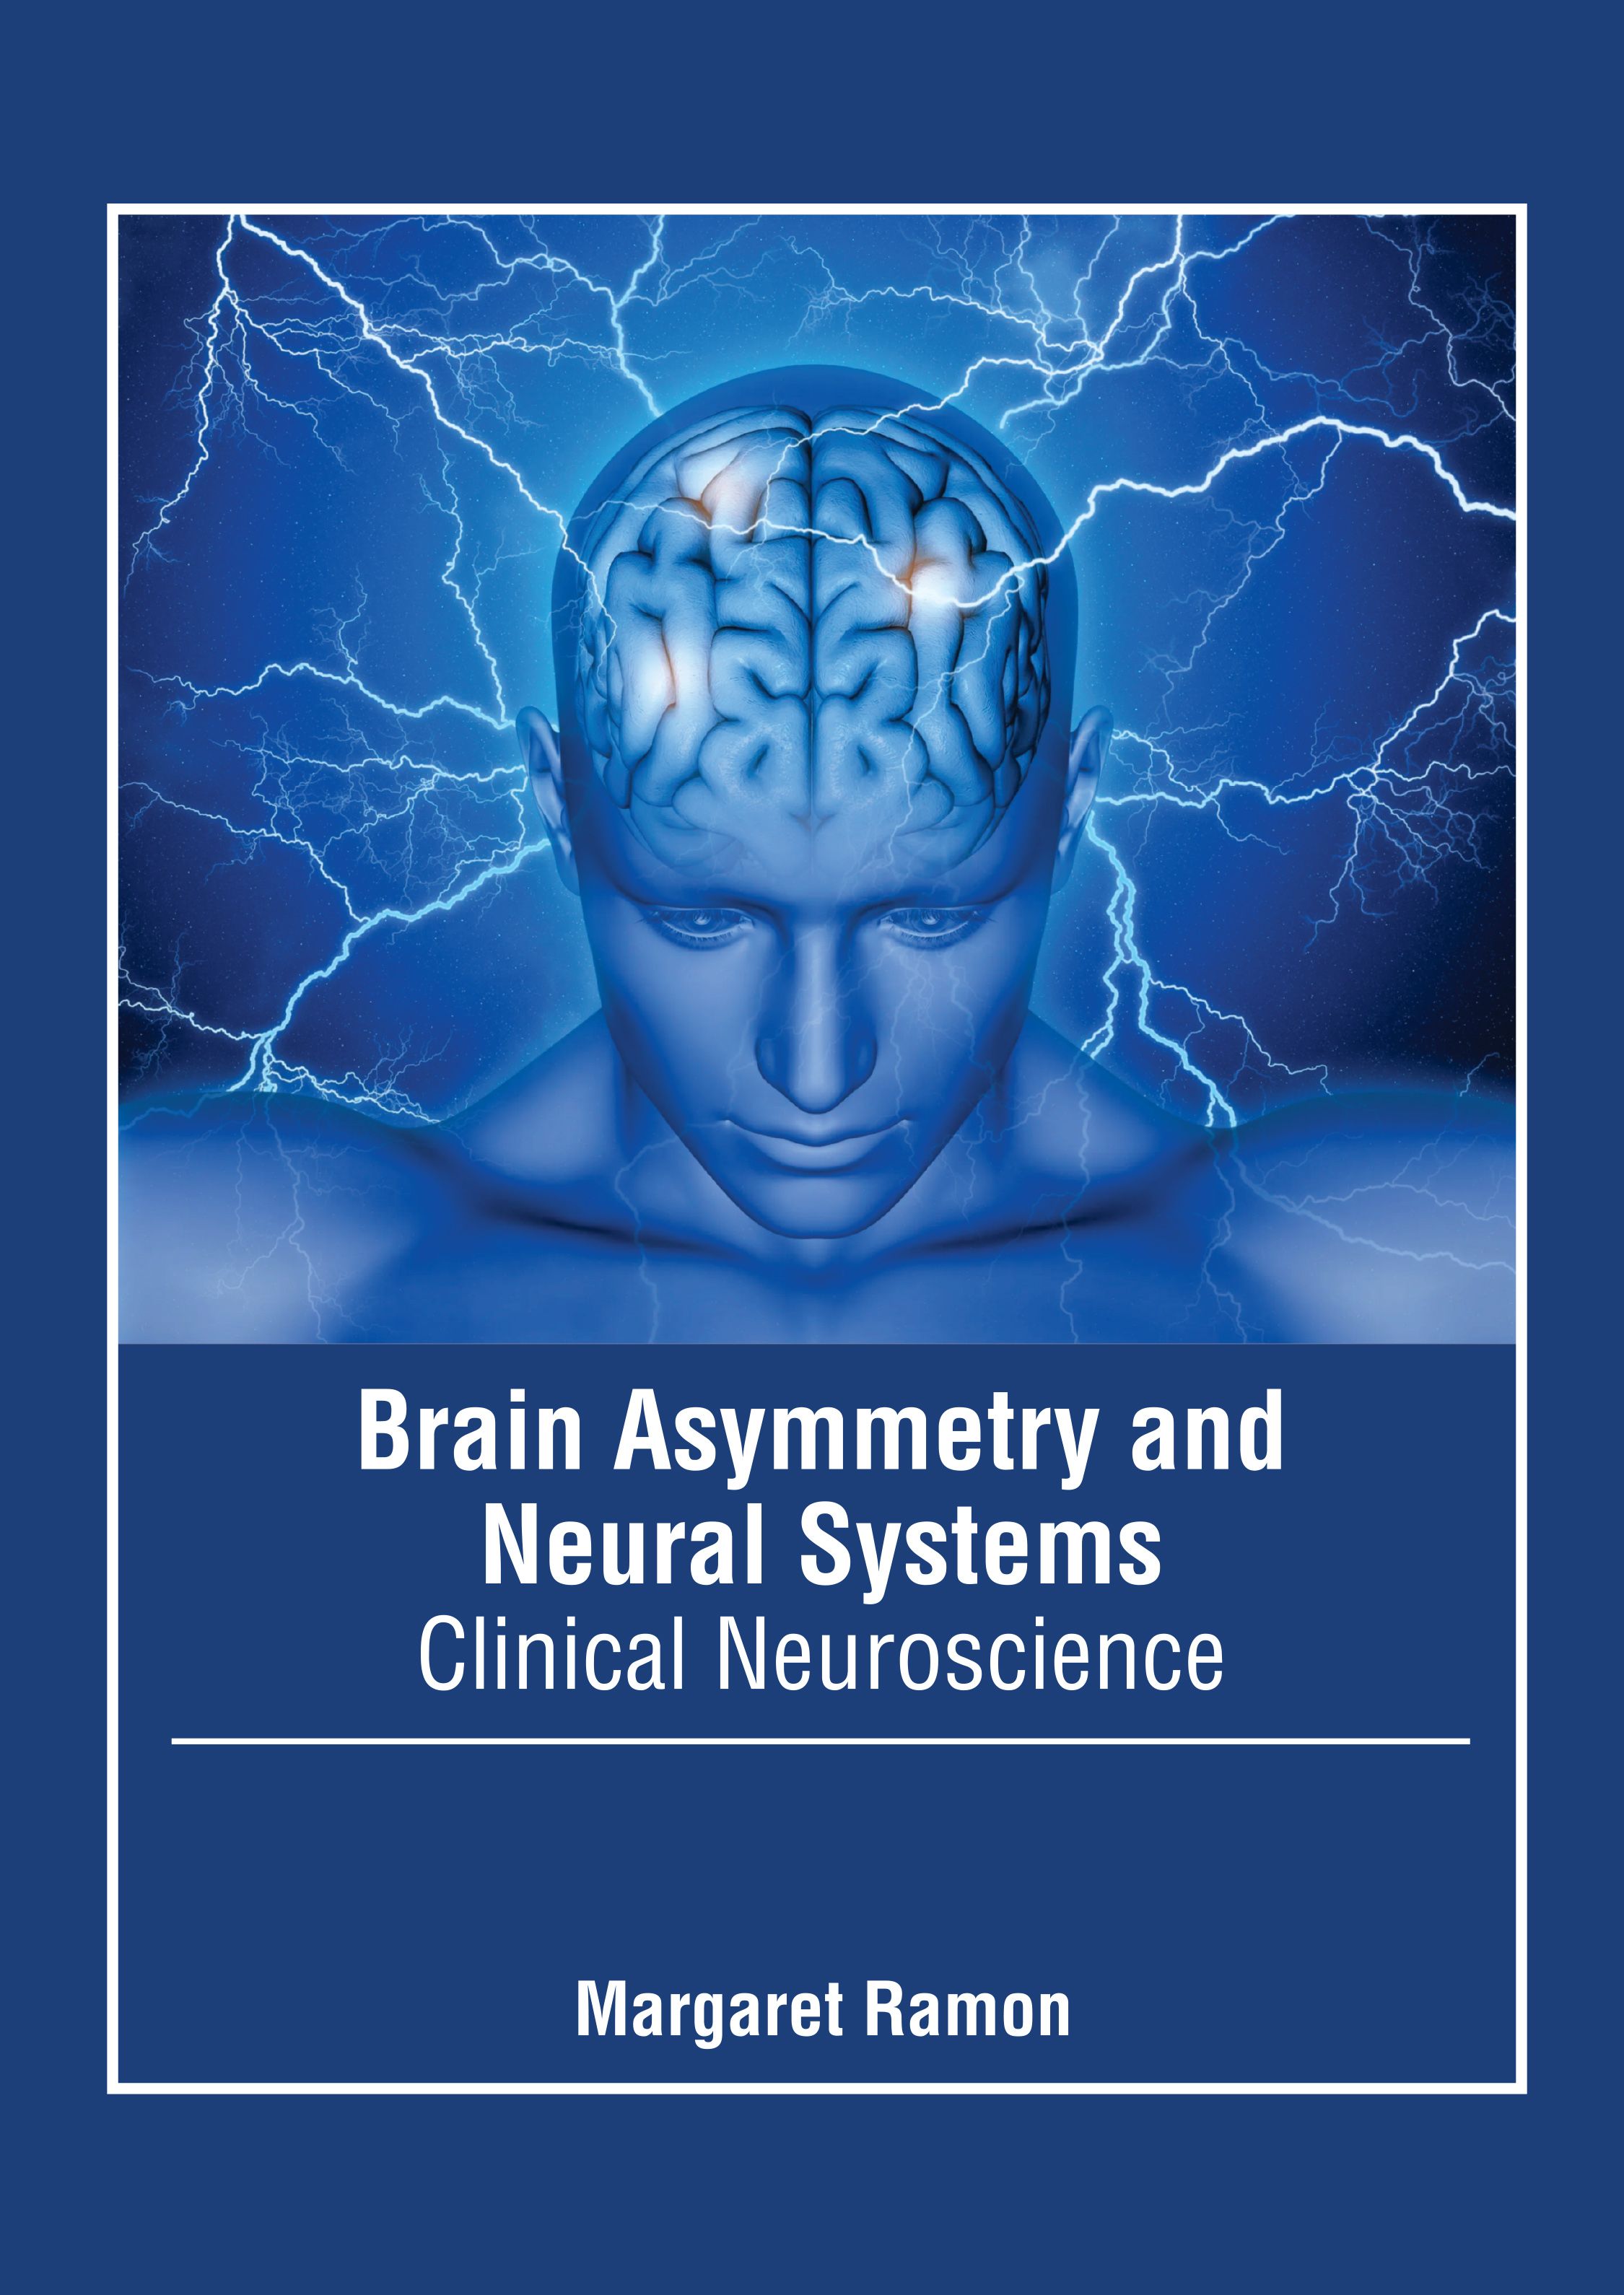 

exclusive-publishers/american-medical-publishers/brain-asymmetry-and-neural-systems-clinical-neuroscience-9781639276059